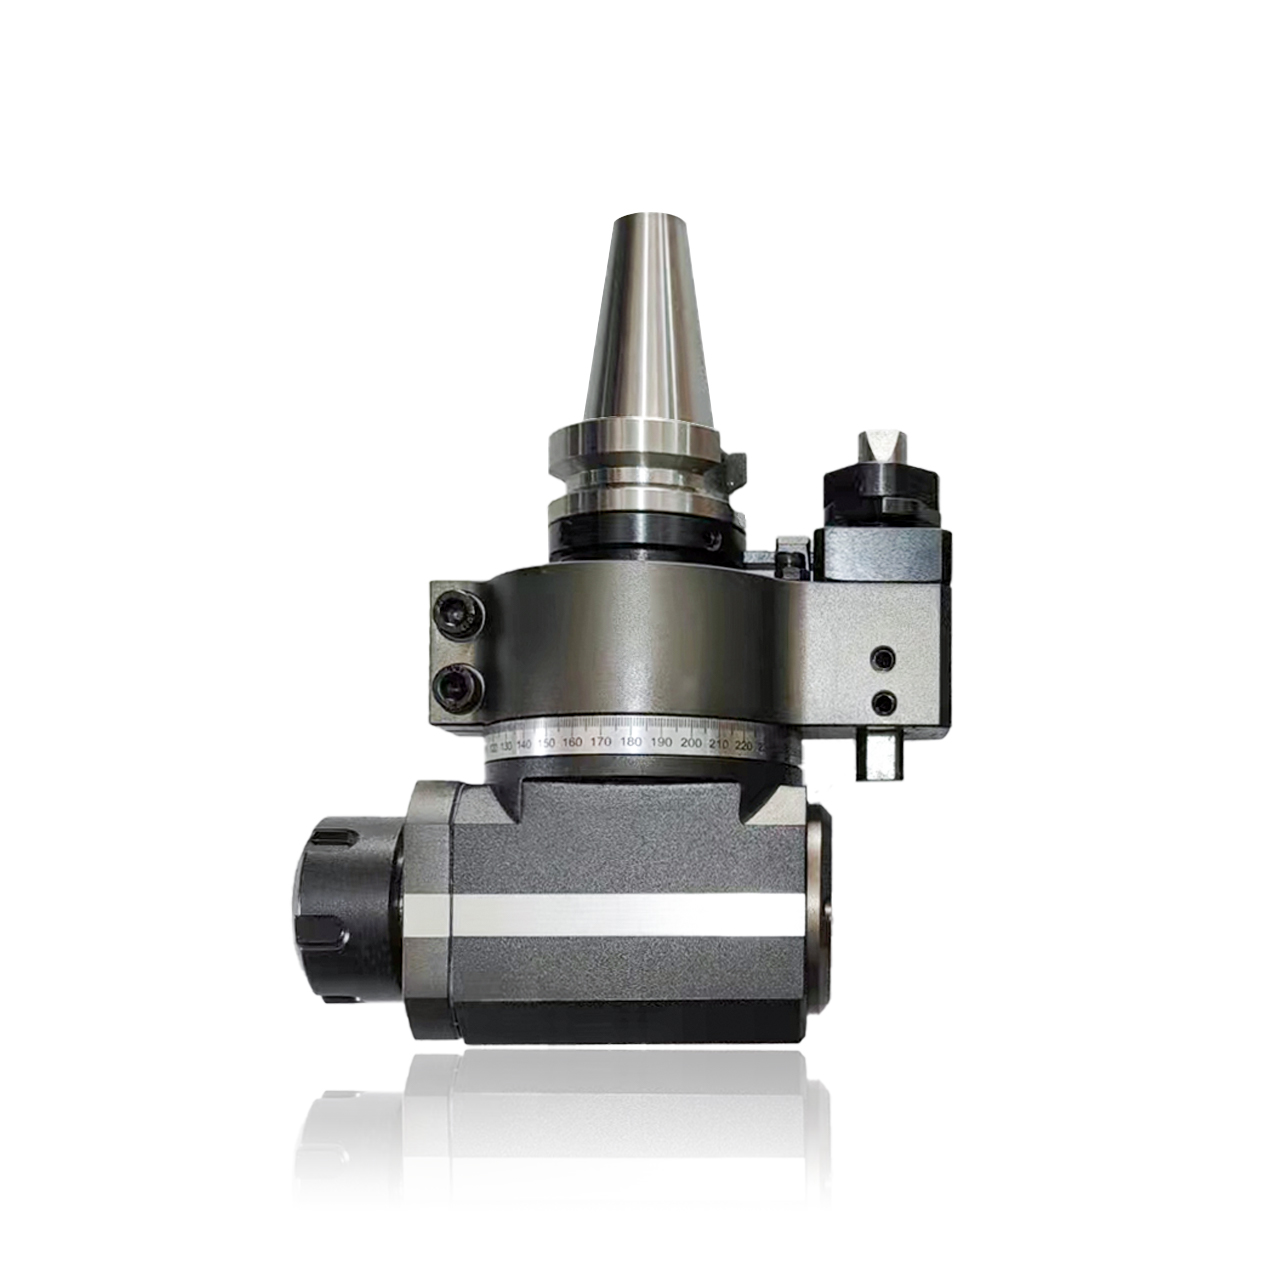 Improving accuracy and efficiency with corner machining